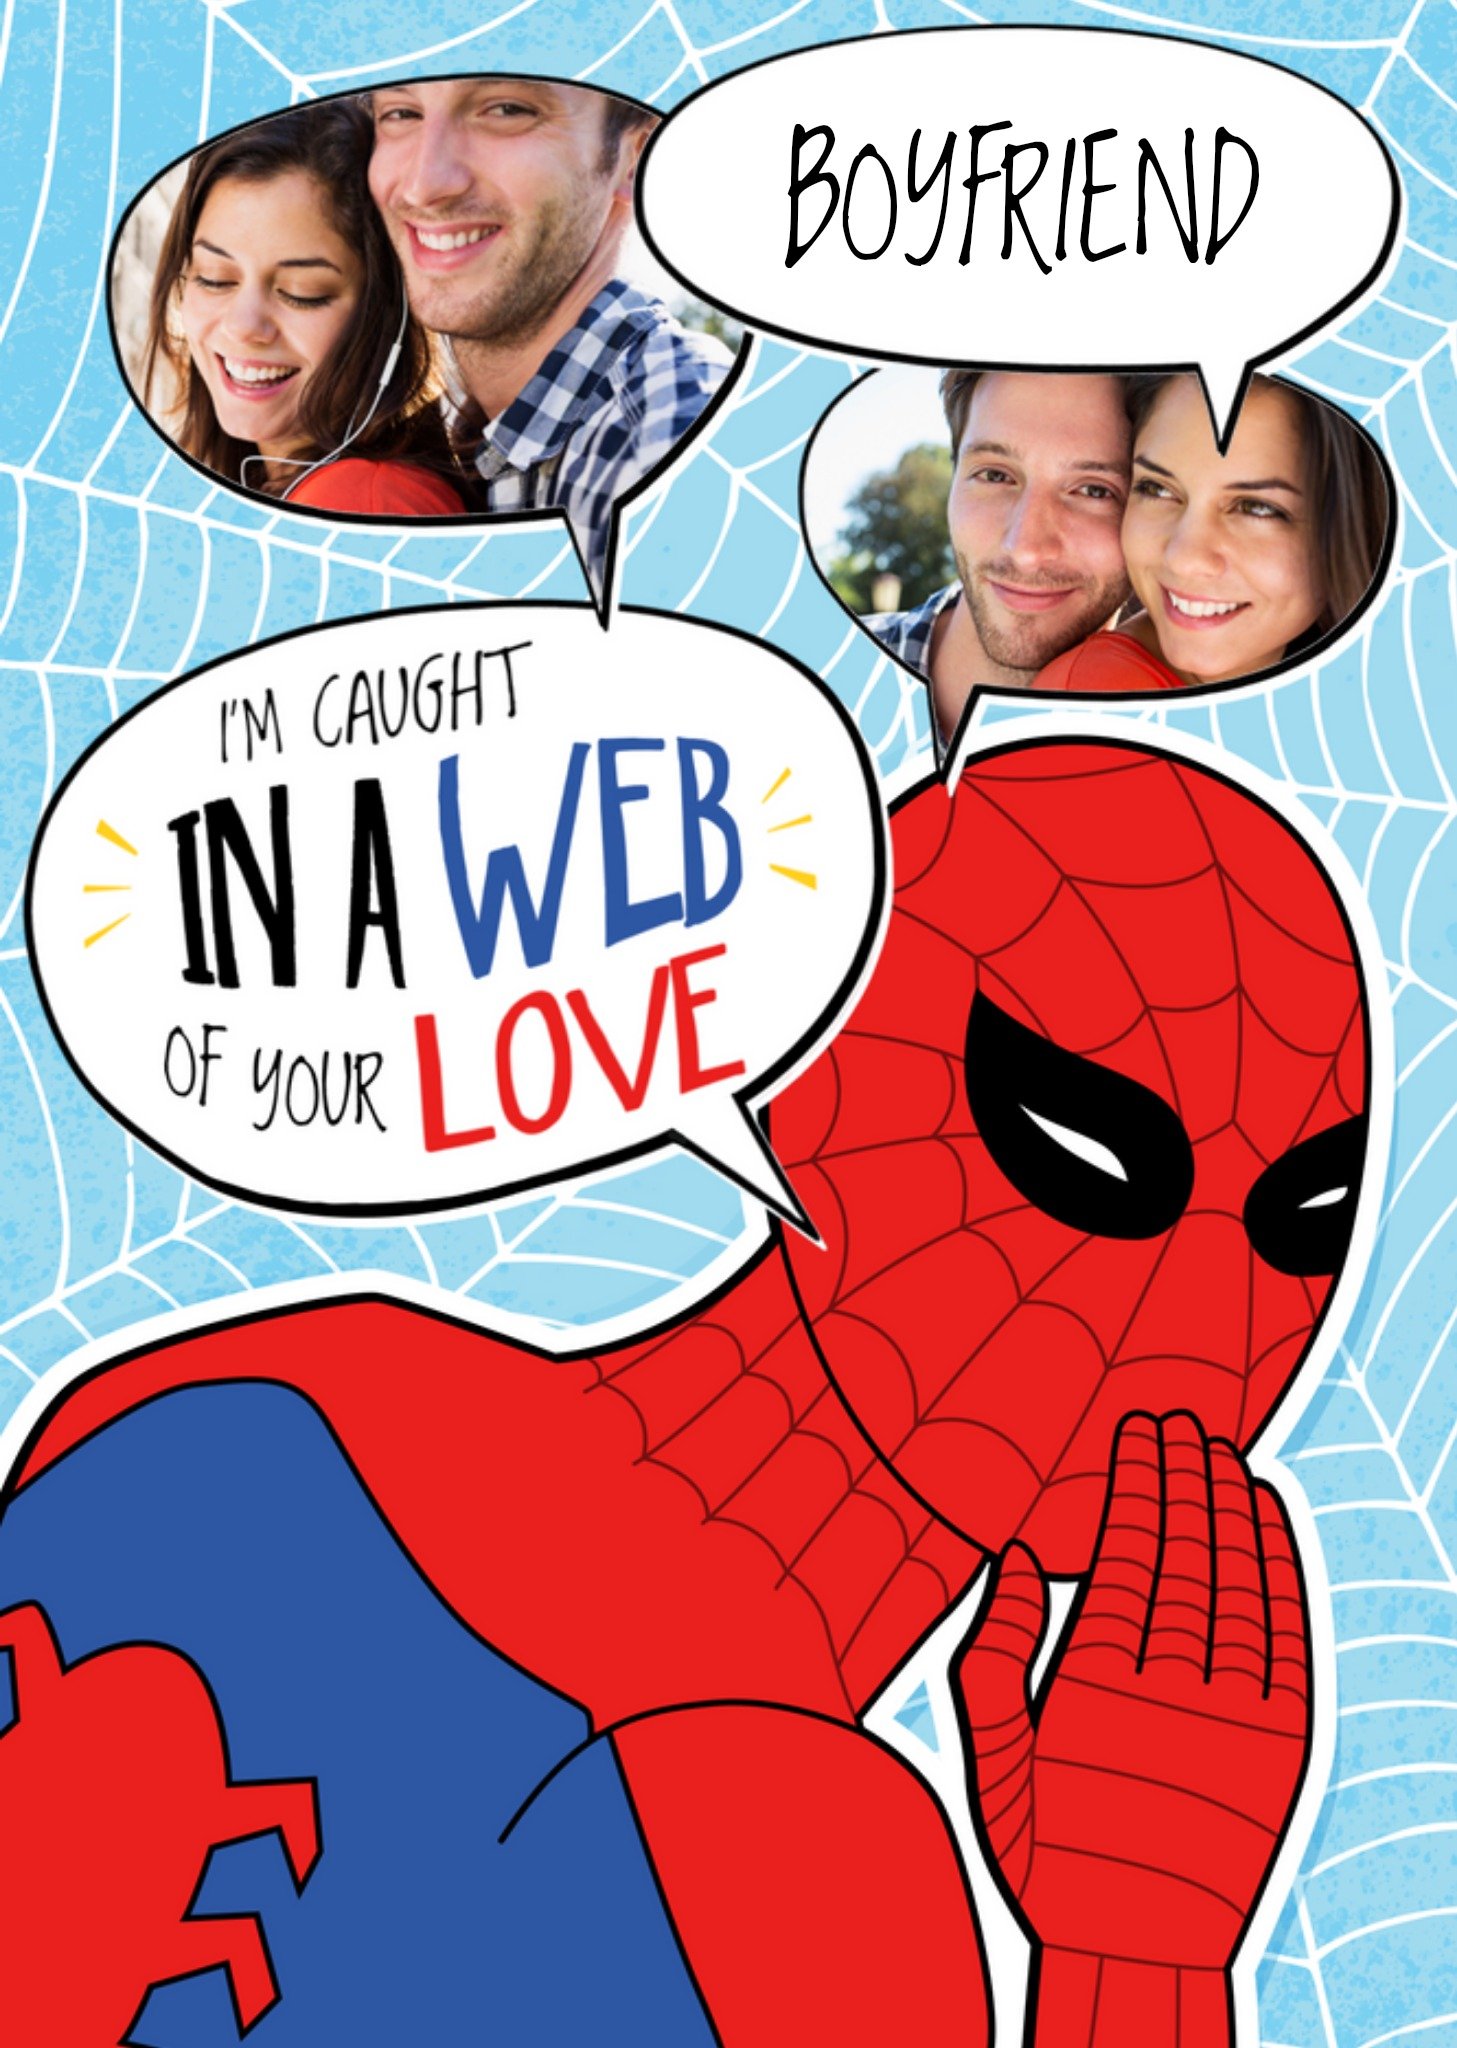 Marvel Caught In A Web Of Your Love Spiderman Photo Upload Valentine's Day Card Ecard